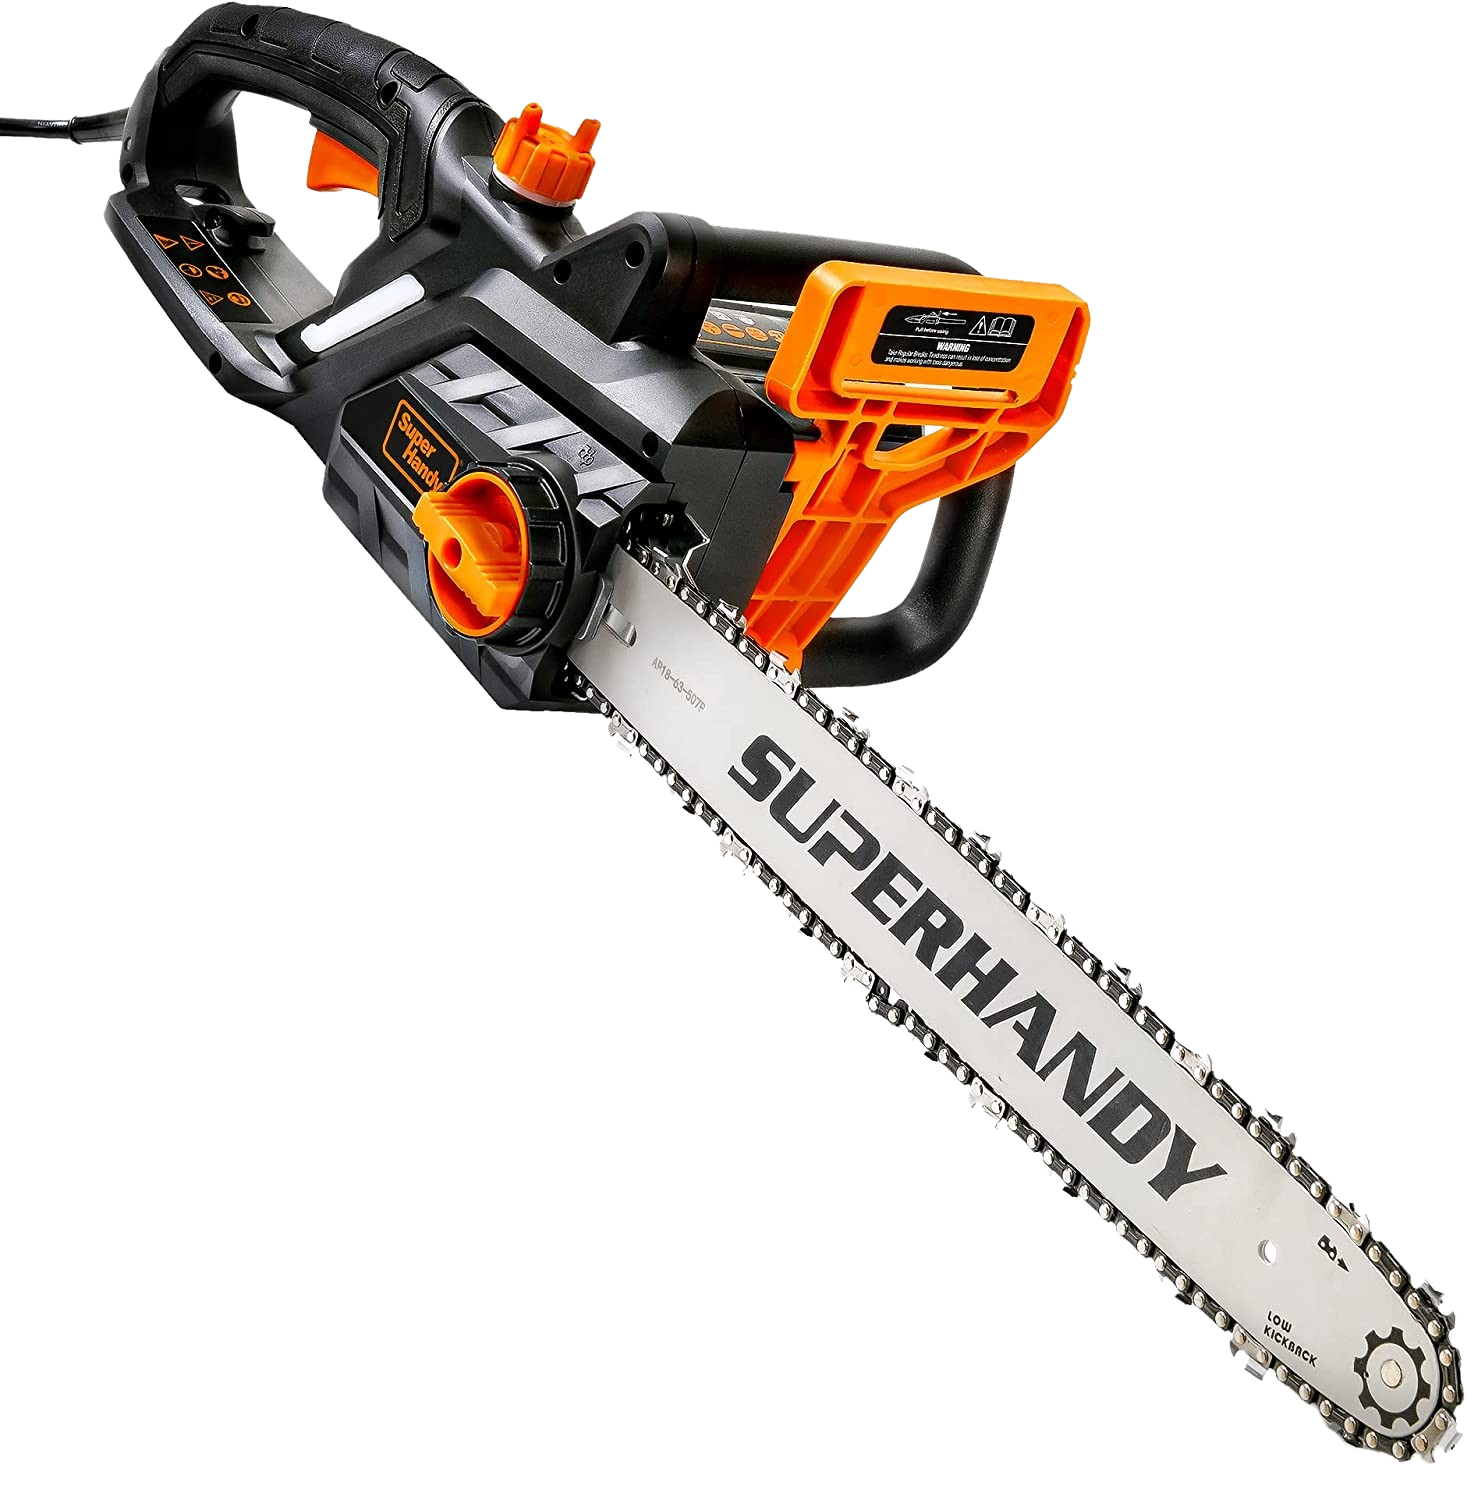 Super Handy, Super Handy GUT118 18 Inch Corded Electric 120VAC 15-Amp 1800W Electric Chainsaw New